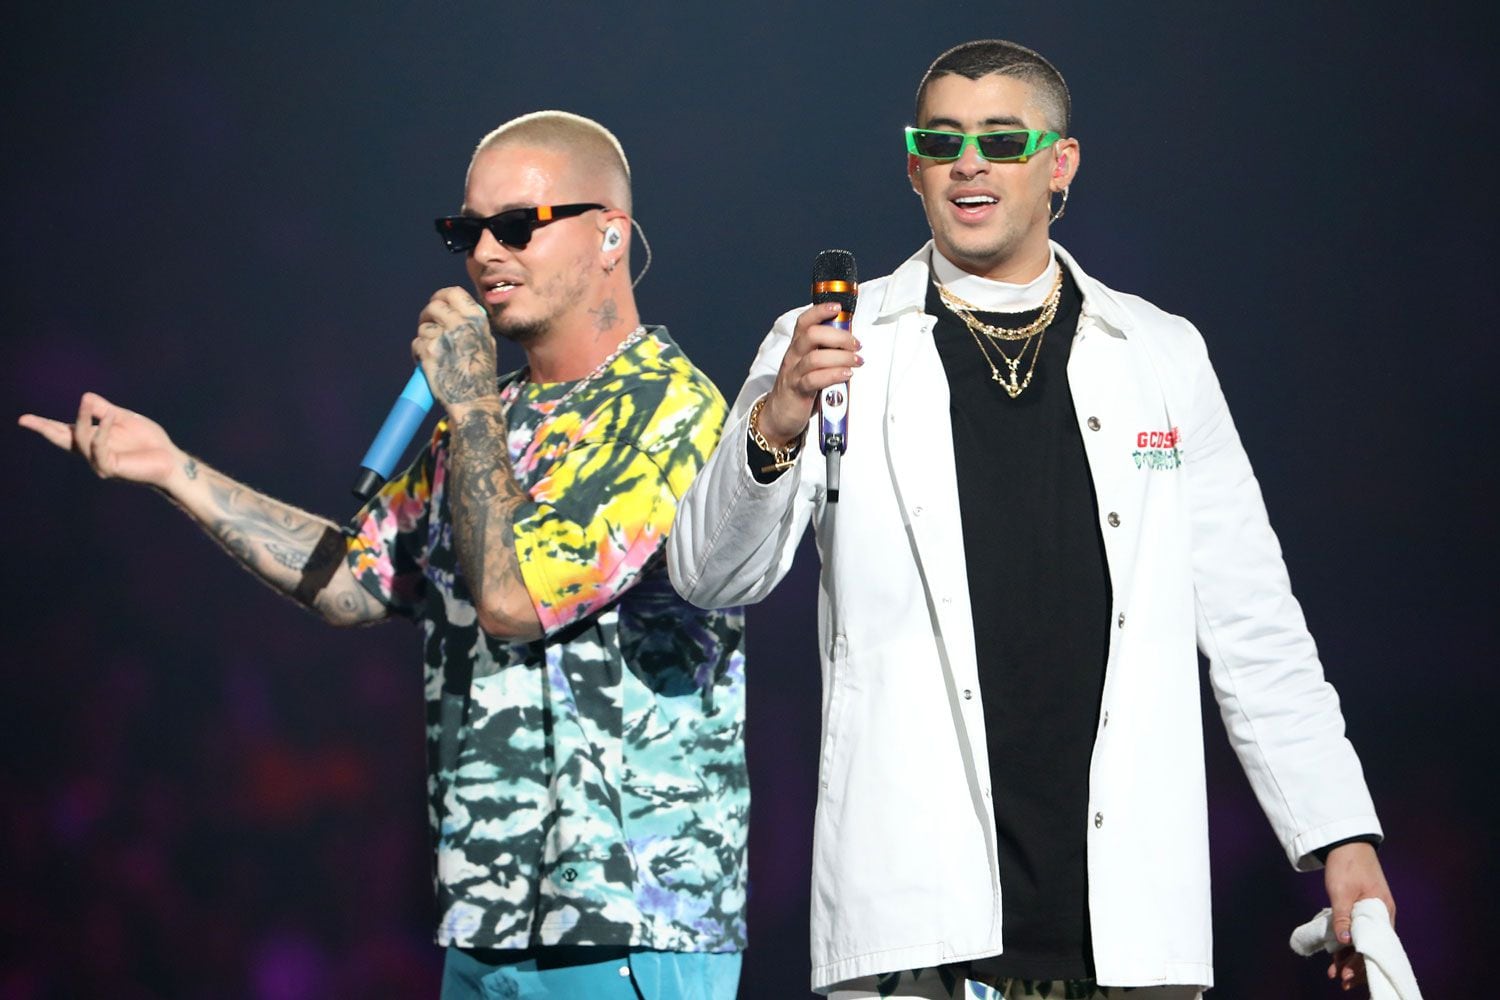 MIAMI, FL - MARCH 14:  J Balvin and Bad Bunny perform on stage during the Bad Bunny concert at the American Airlines Arena on March 14, 2019 in Miami, Florida.  (Photo by Alexander Tamargo/Getty Images)